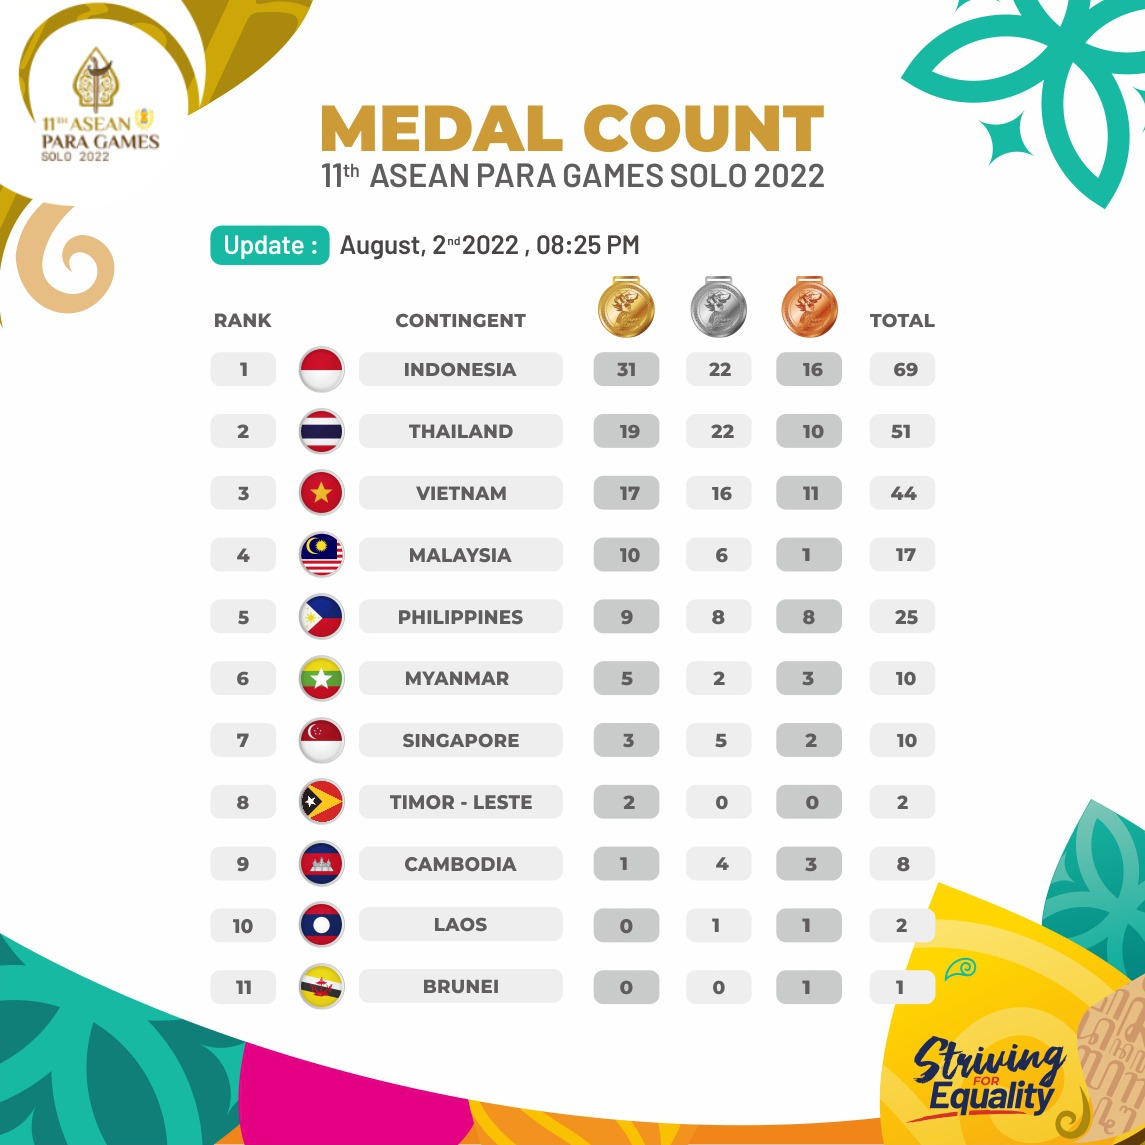 Recap medals collection at The 11th ASEAN Para Games Solo 2022 as per August, 2nd 2022. Indonesia still leads in first position, followed by Thailand and Vietnam in second and third positions. 

#apgsolo2022 #apg22update #strivingforequality